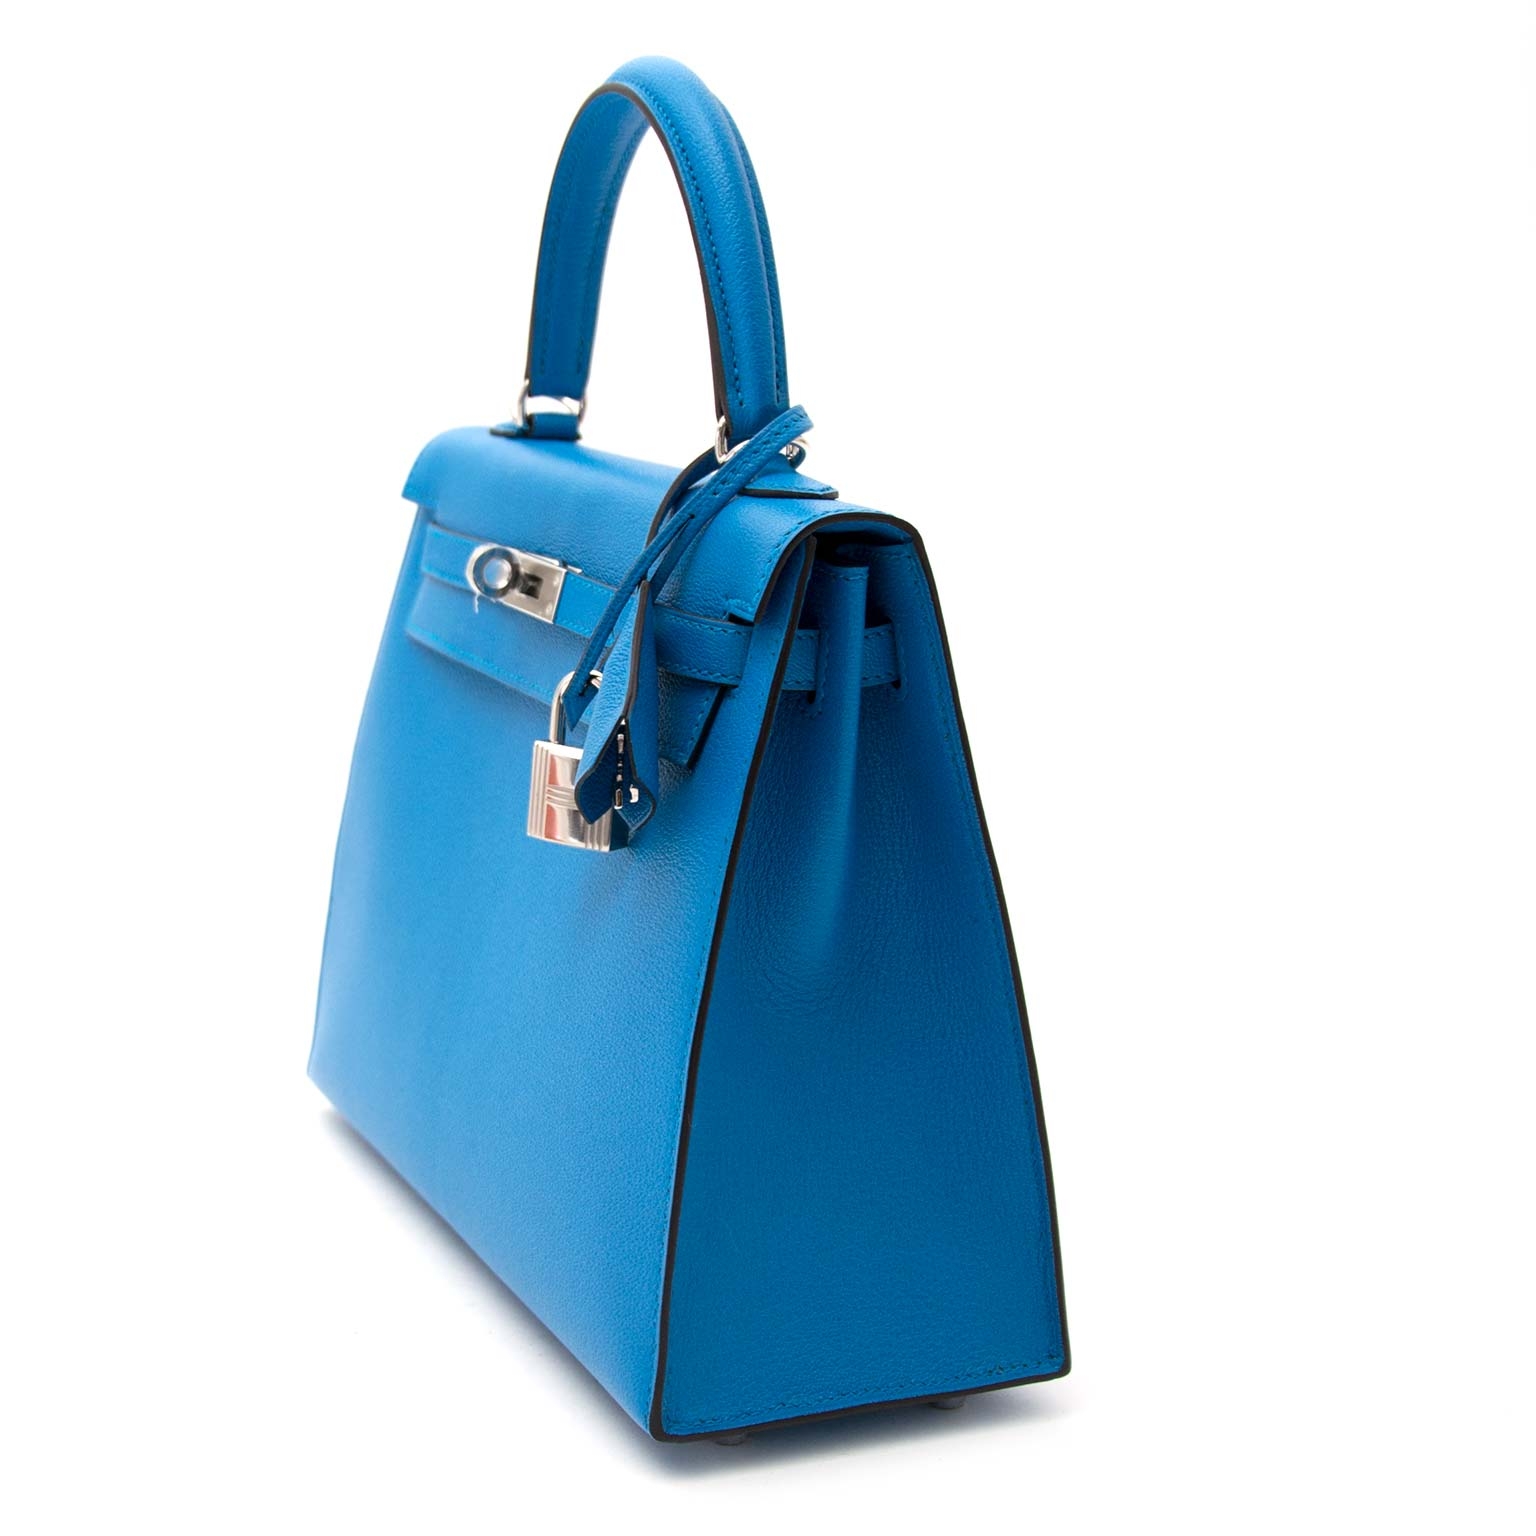 New authentic Hermes Kelly 25 blue zanzibar with silver hardware ○ Labellov  ○ Buy and Sell Authentic Luxury